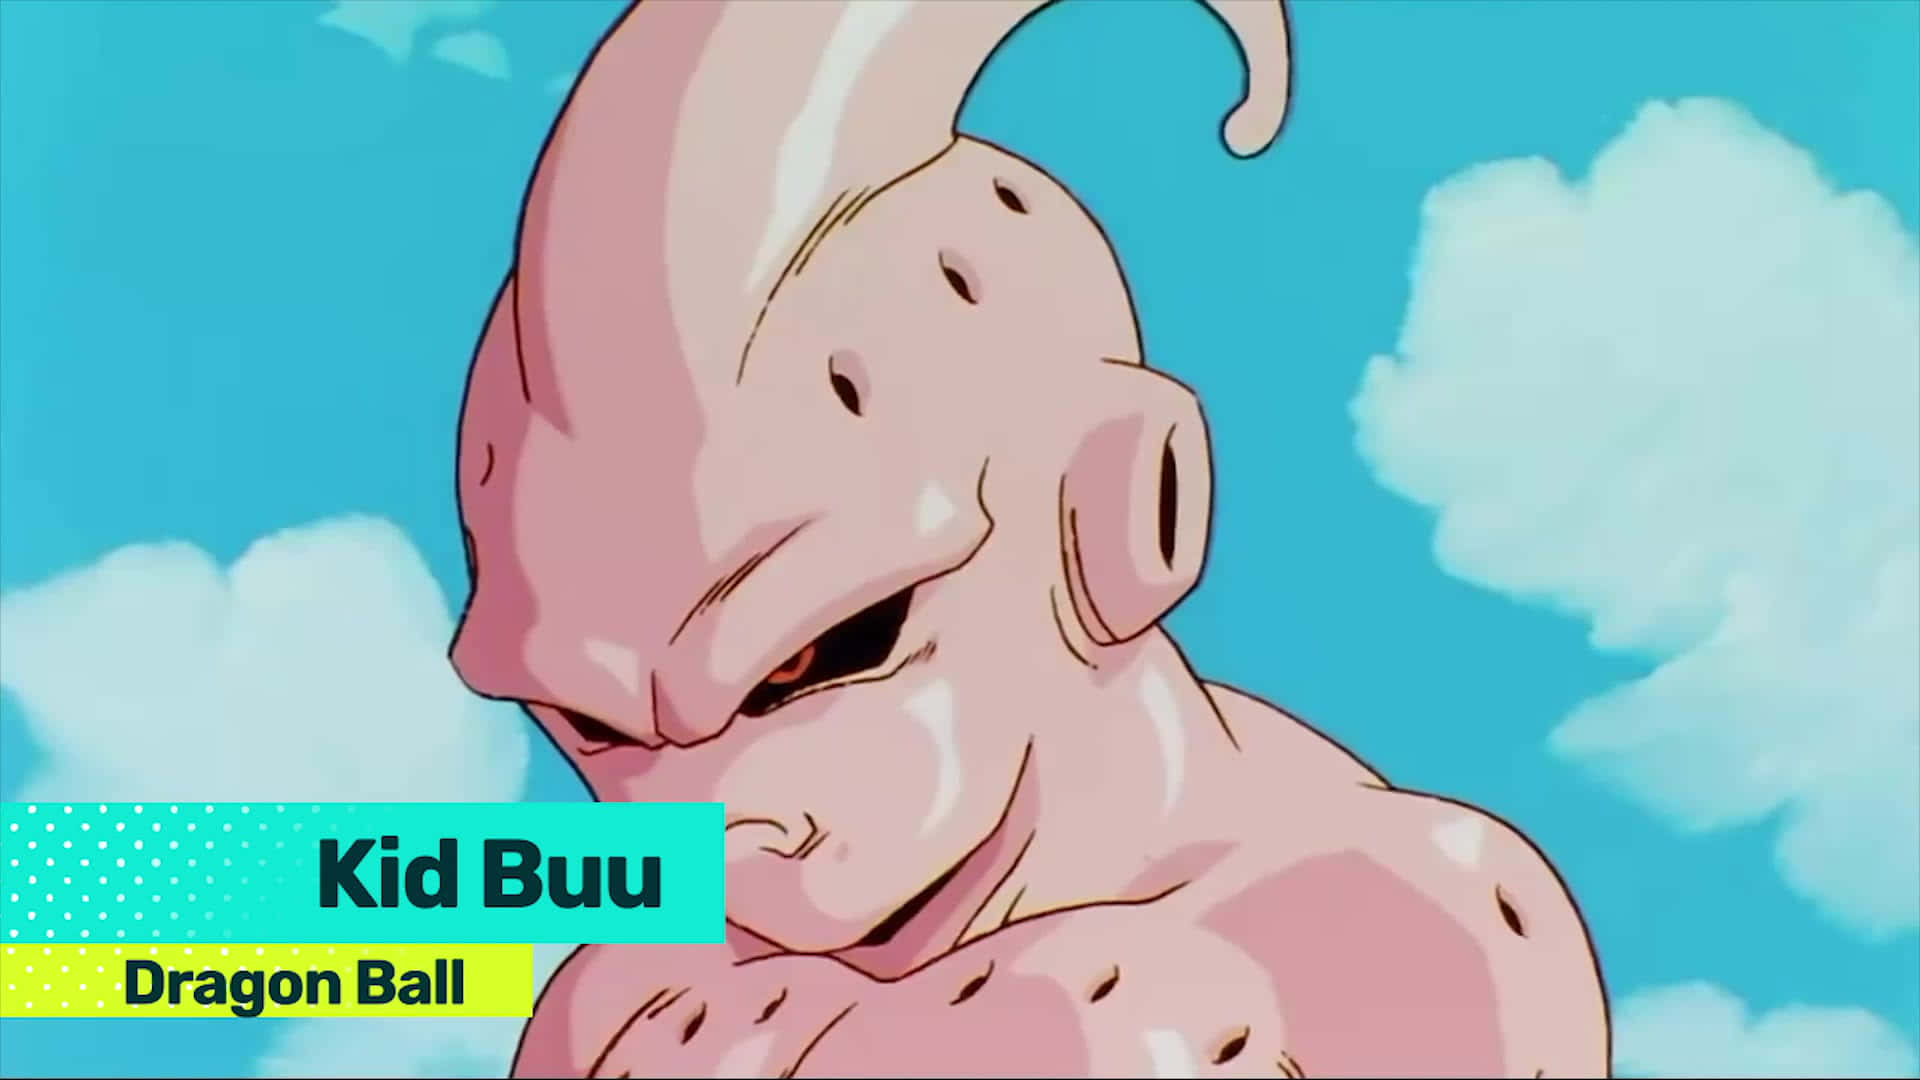 Fire and Fury Fills the Air in Powerful Artwork of Majin Buu Wallpaper